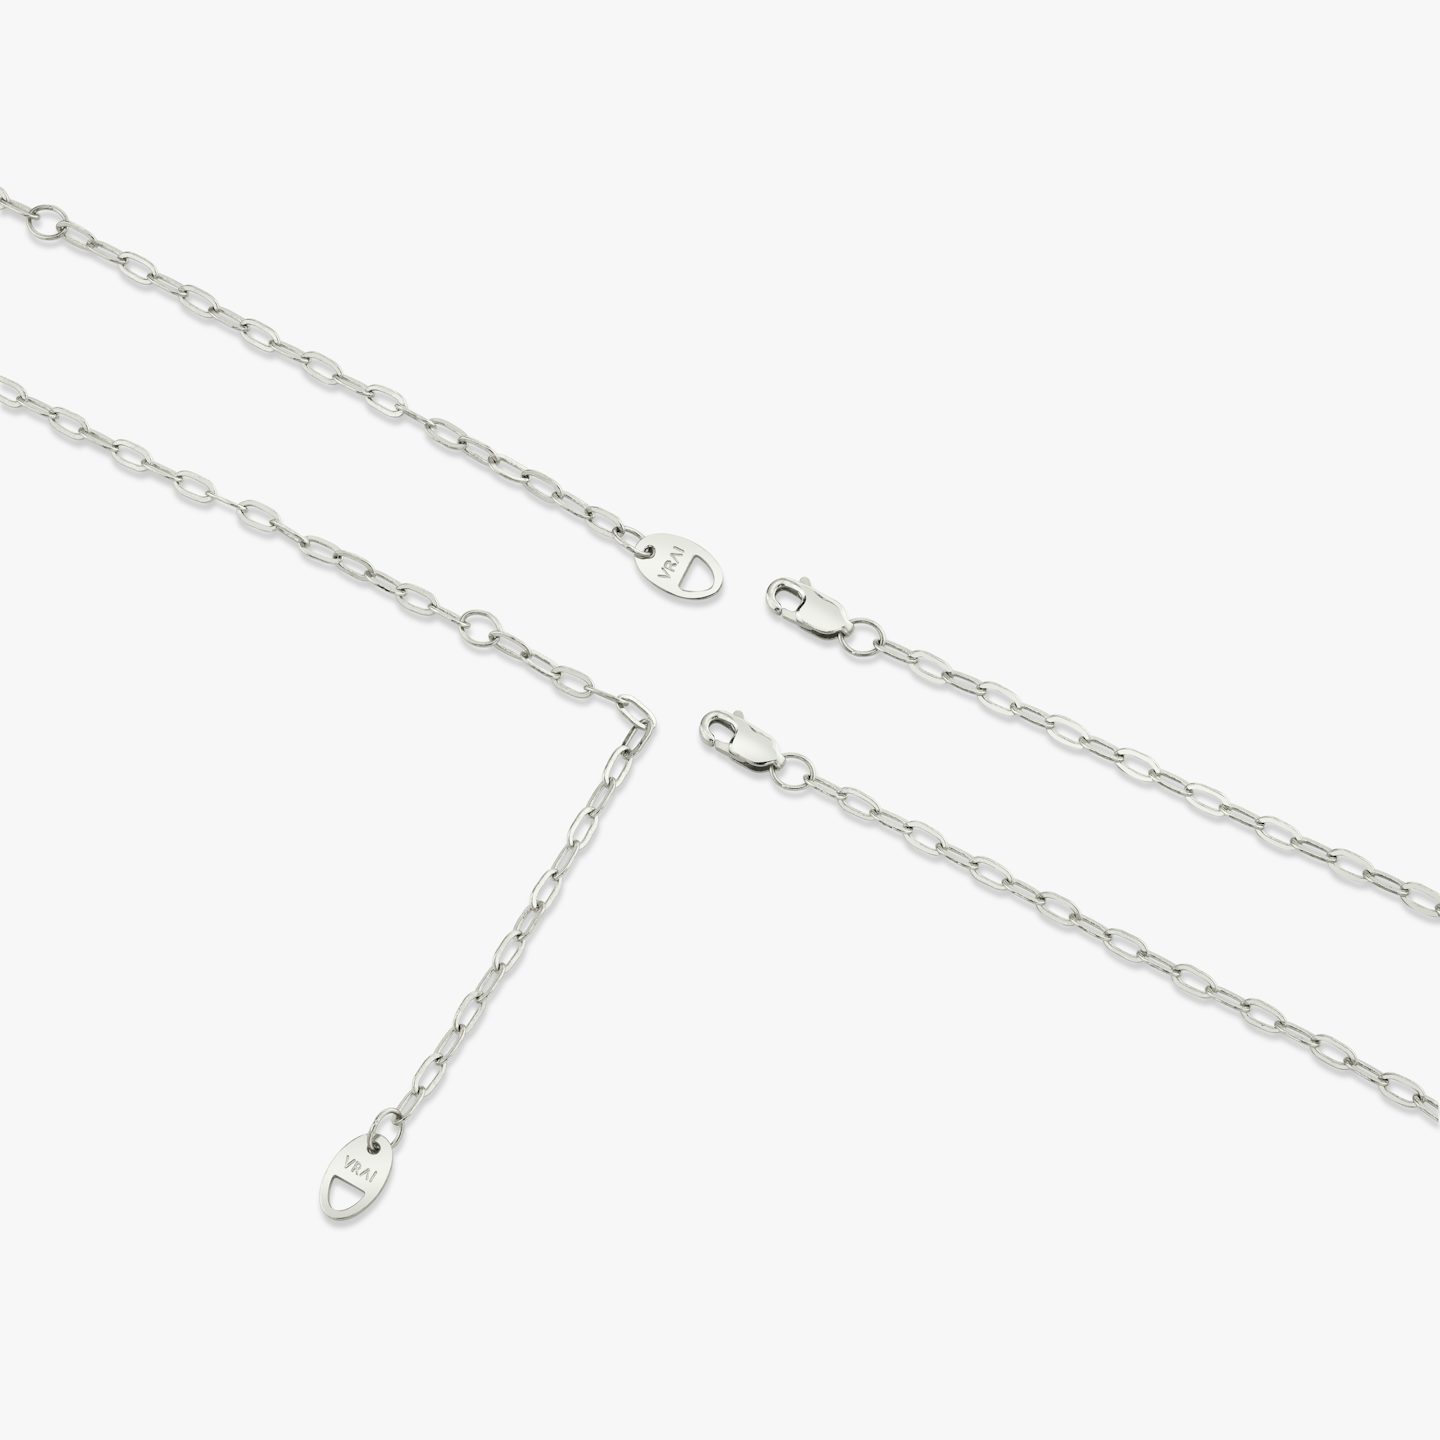 Suspended Solitaire Cross | Platinum | Chain length: 18-20